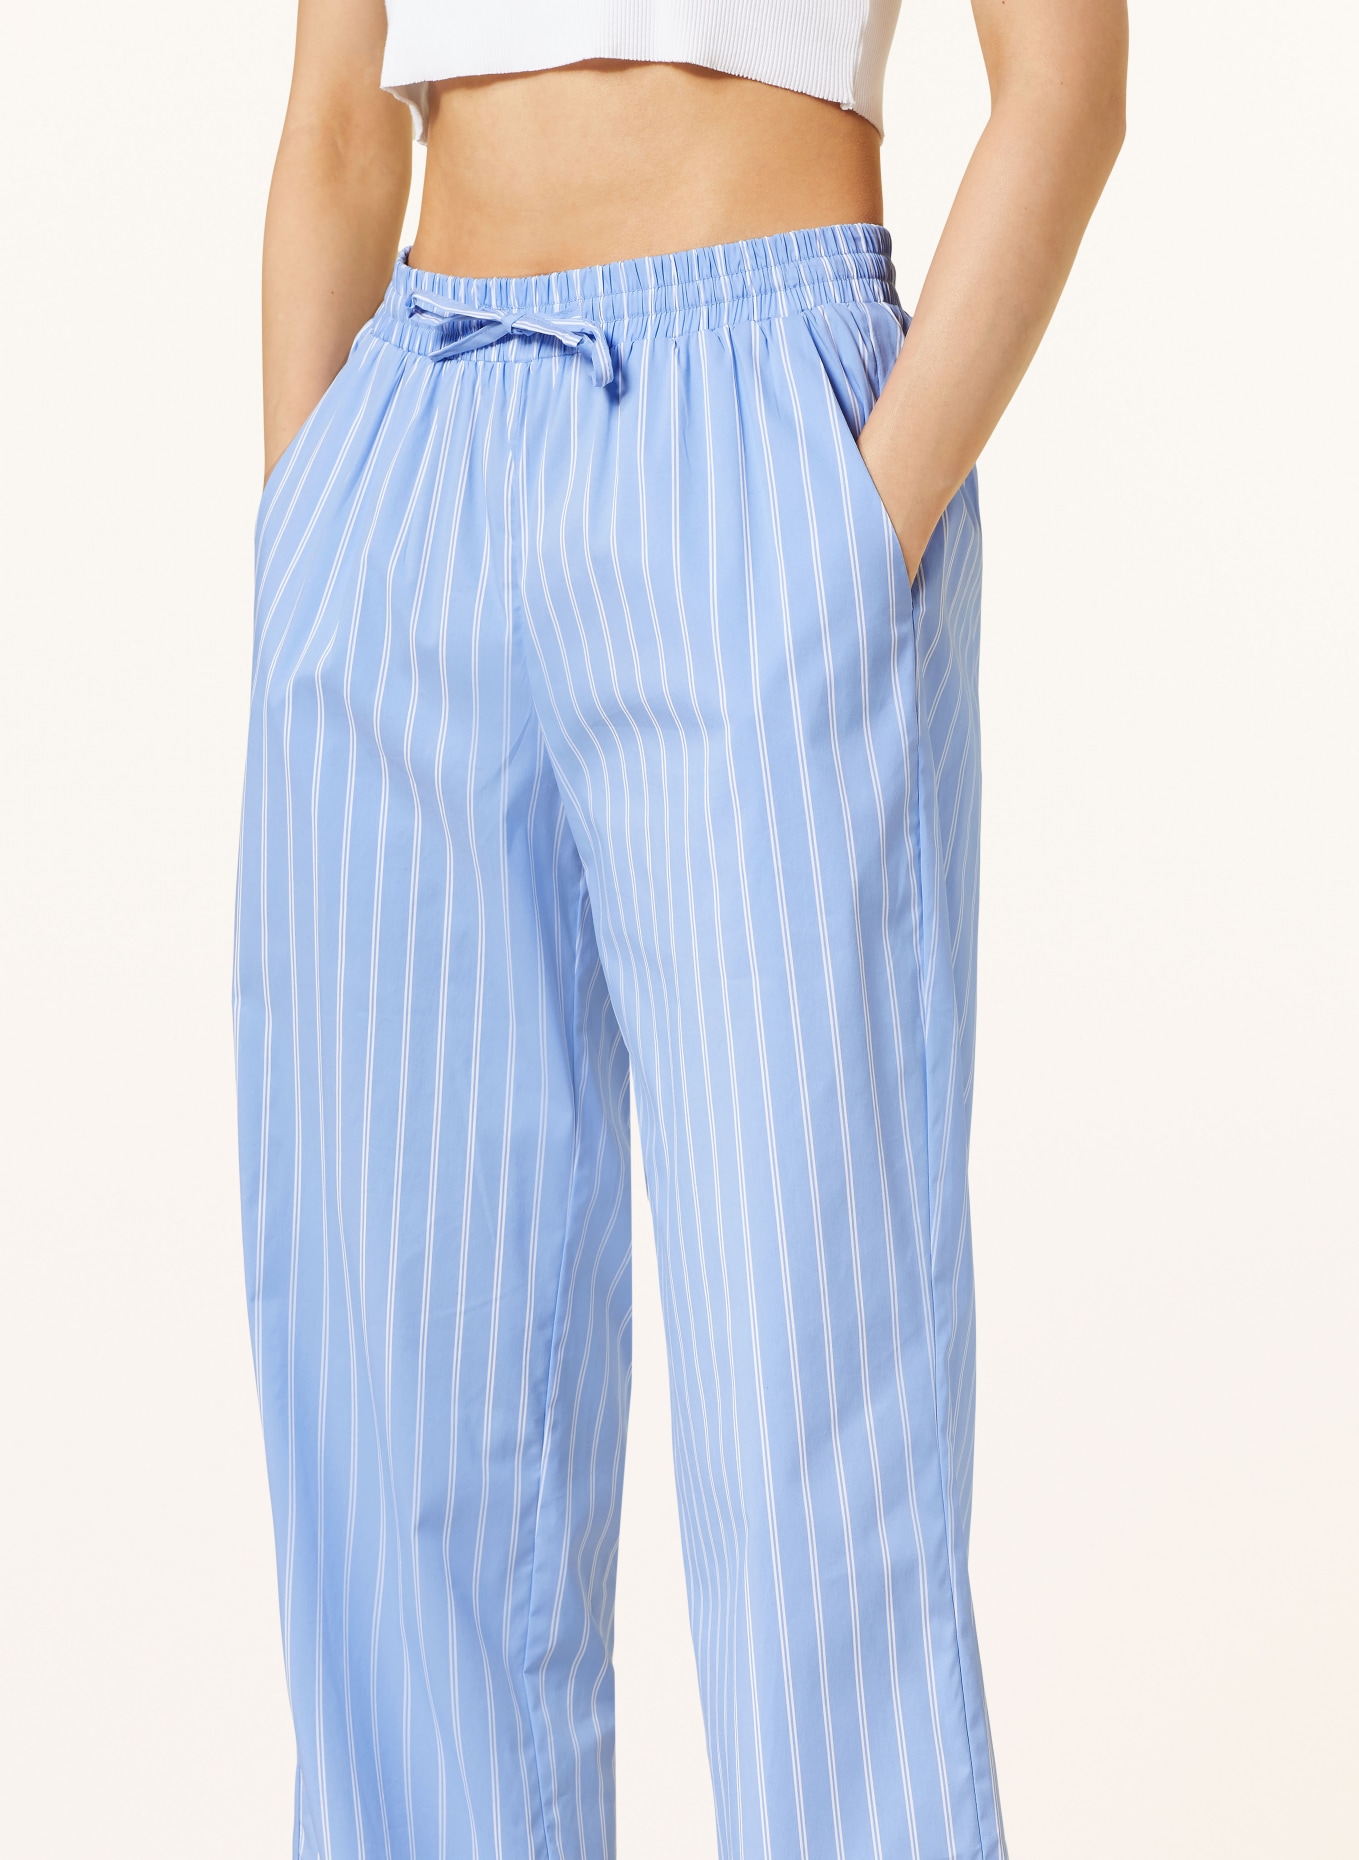 NEO NOIR Trousers SONAR in jogger style, Color: LIGHT BLUE/ WHITE (Image 5)